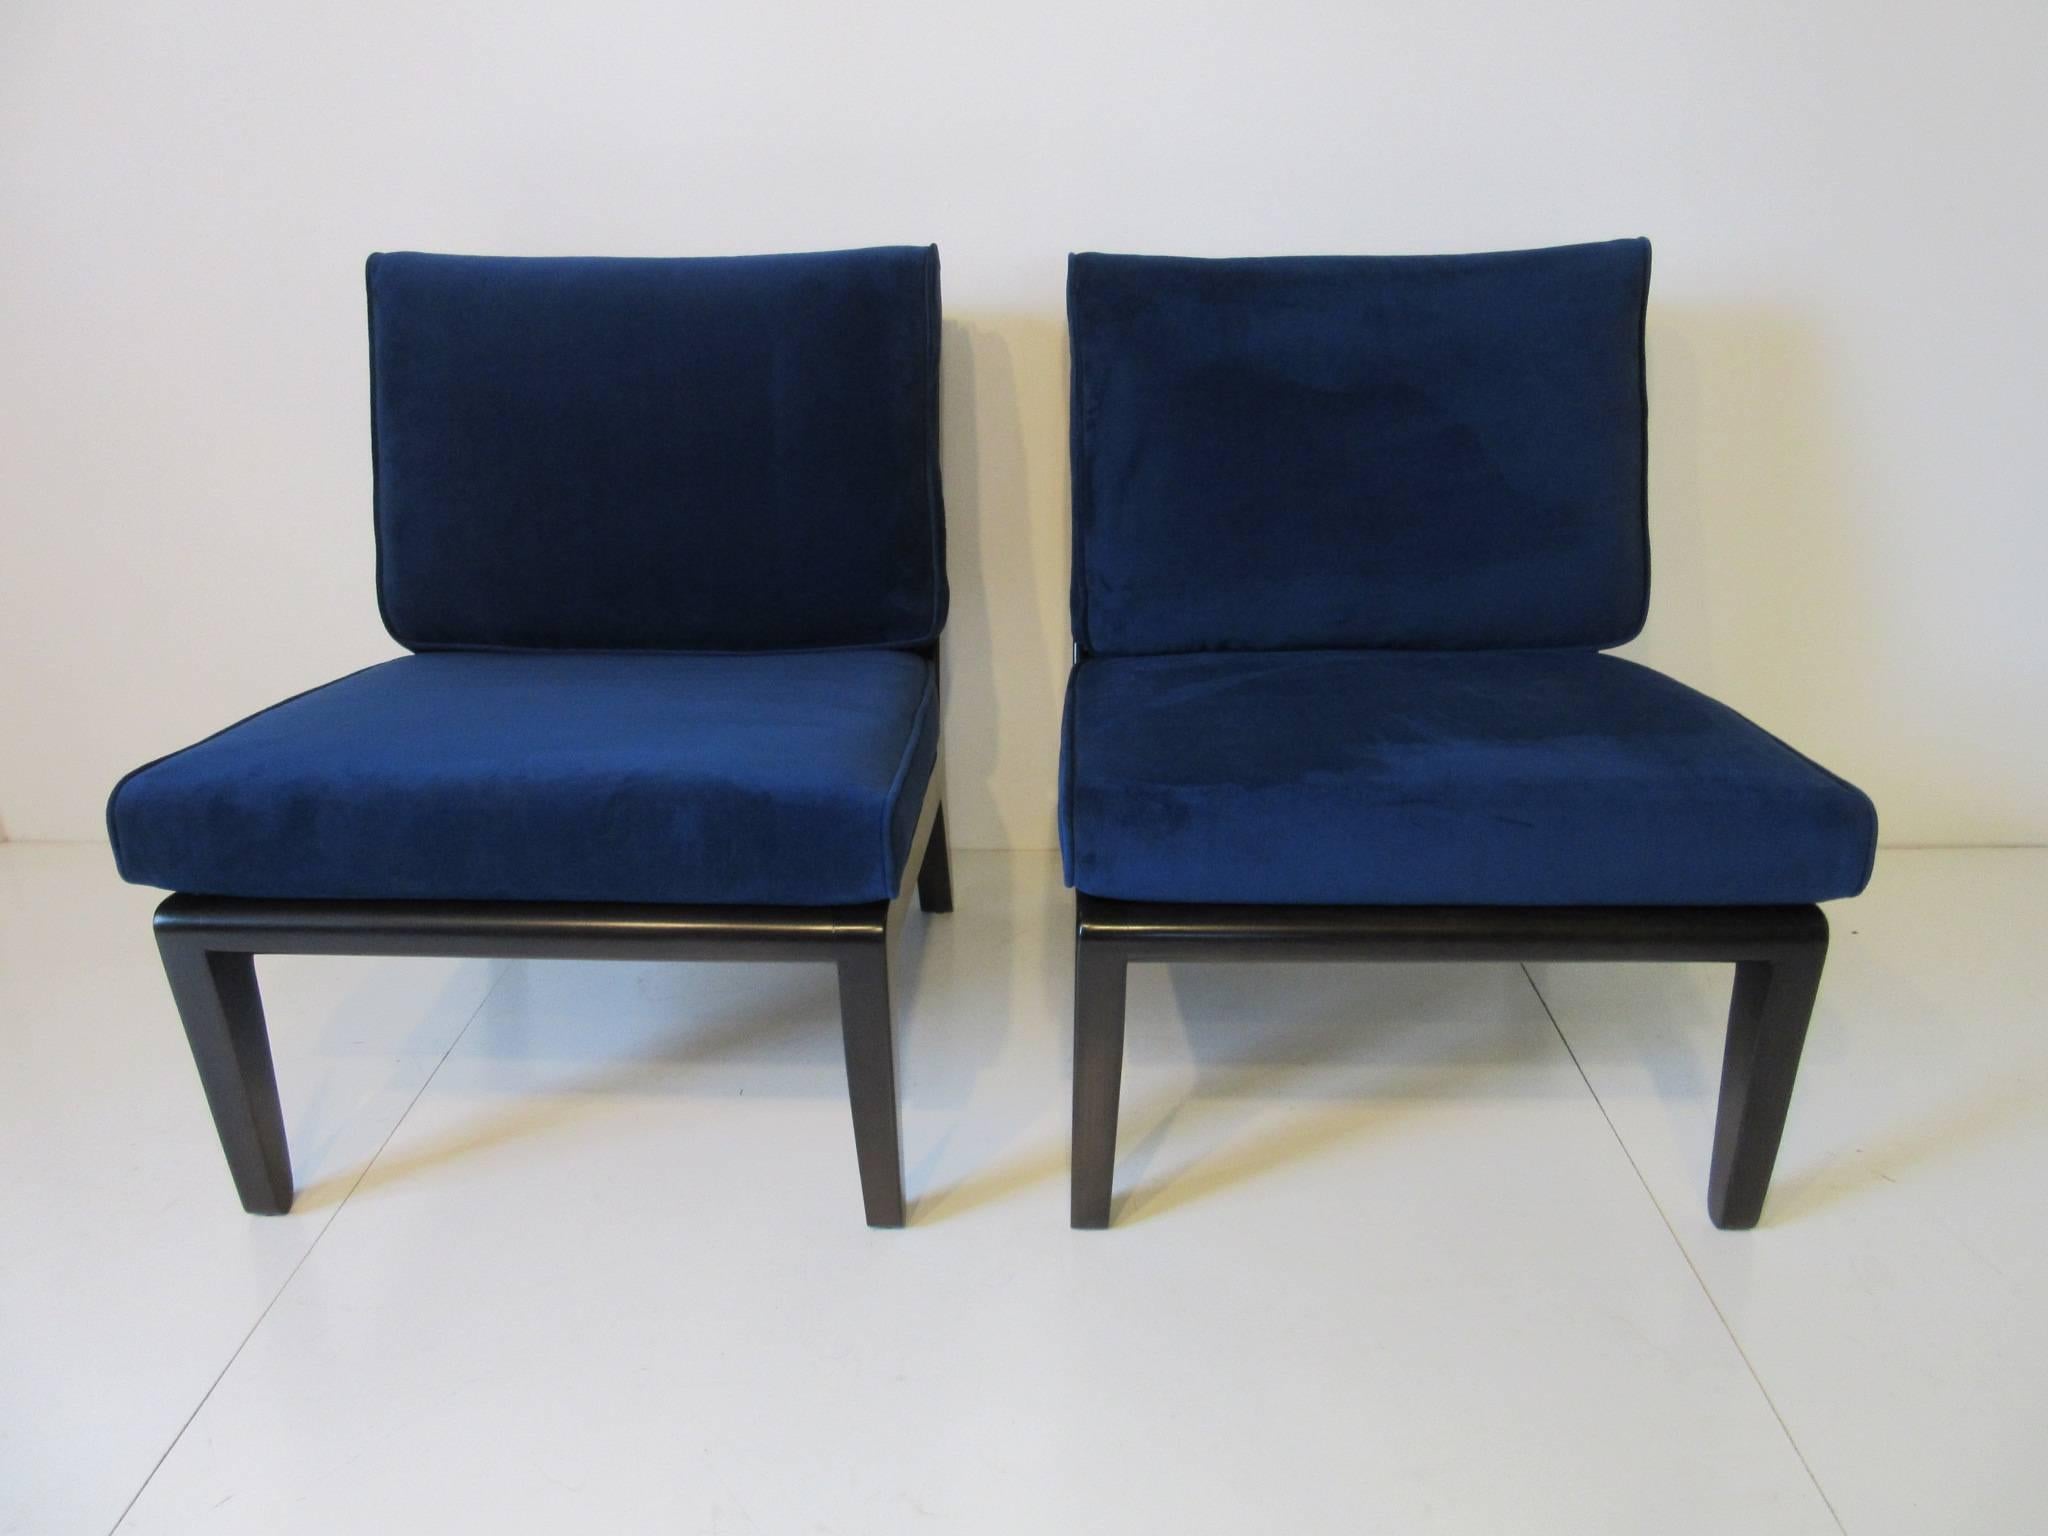 A pair of dark ebony finished slipper chairs with rich sapphire blue velvet upholstered cushions with rolled edges to accent the roll of the legs. Manufactured by Drexel and designed by Edward Wormley.